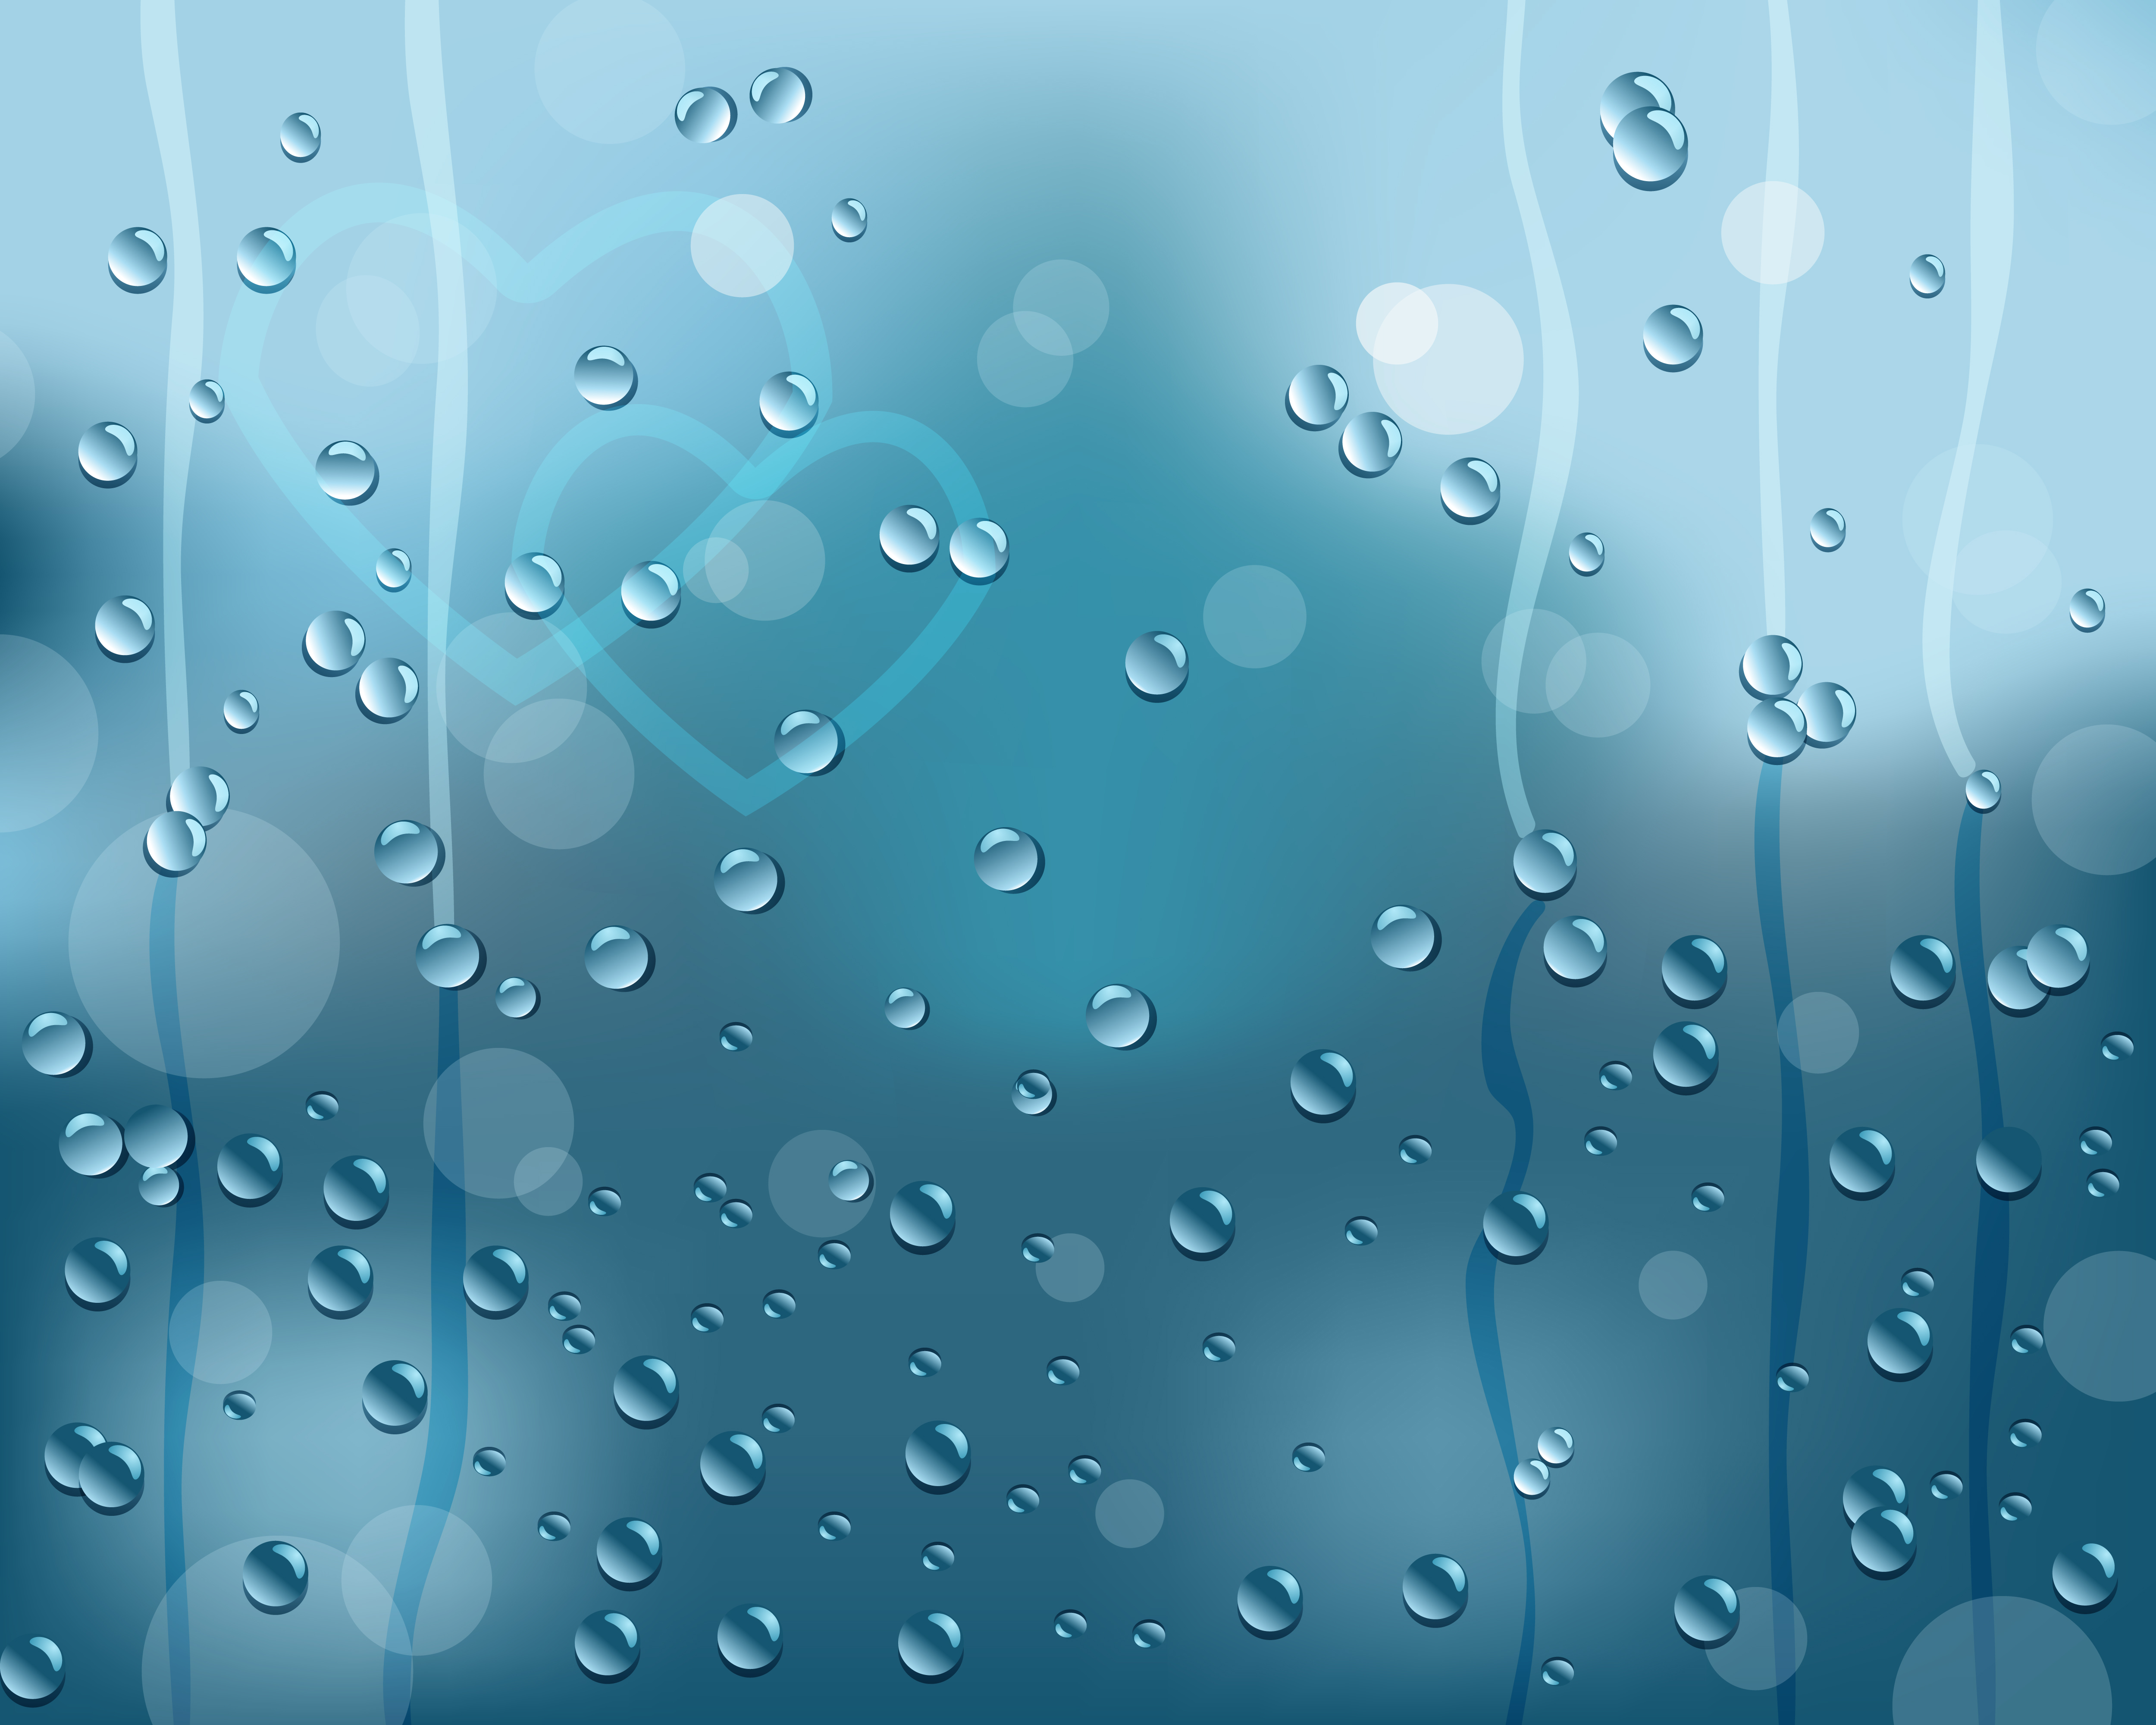 Rain On Window As Background. Eps10 Vector. This File Contains Transparency And Blending.